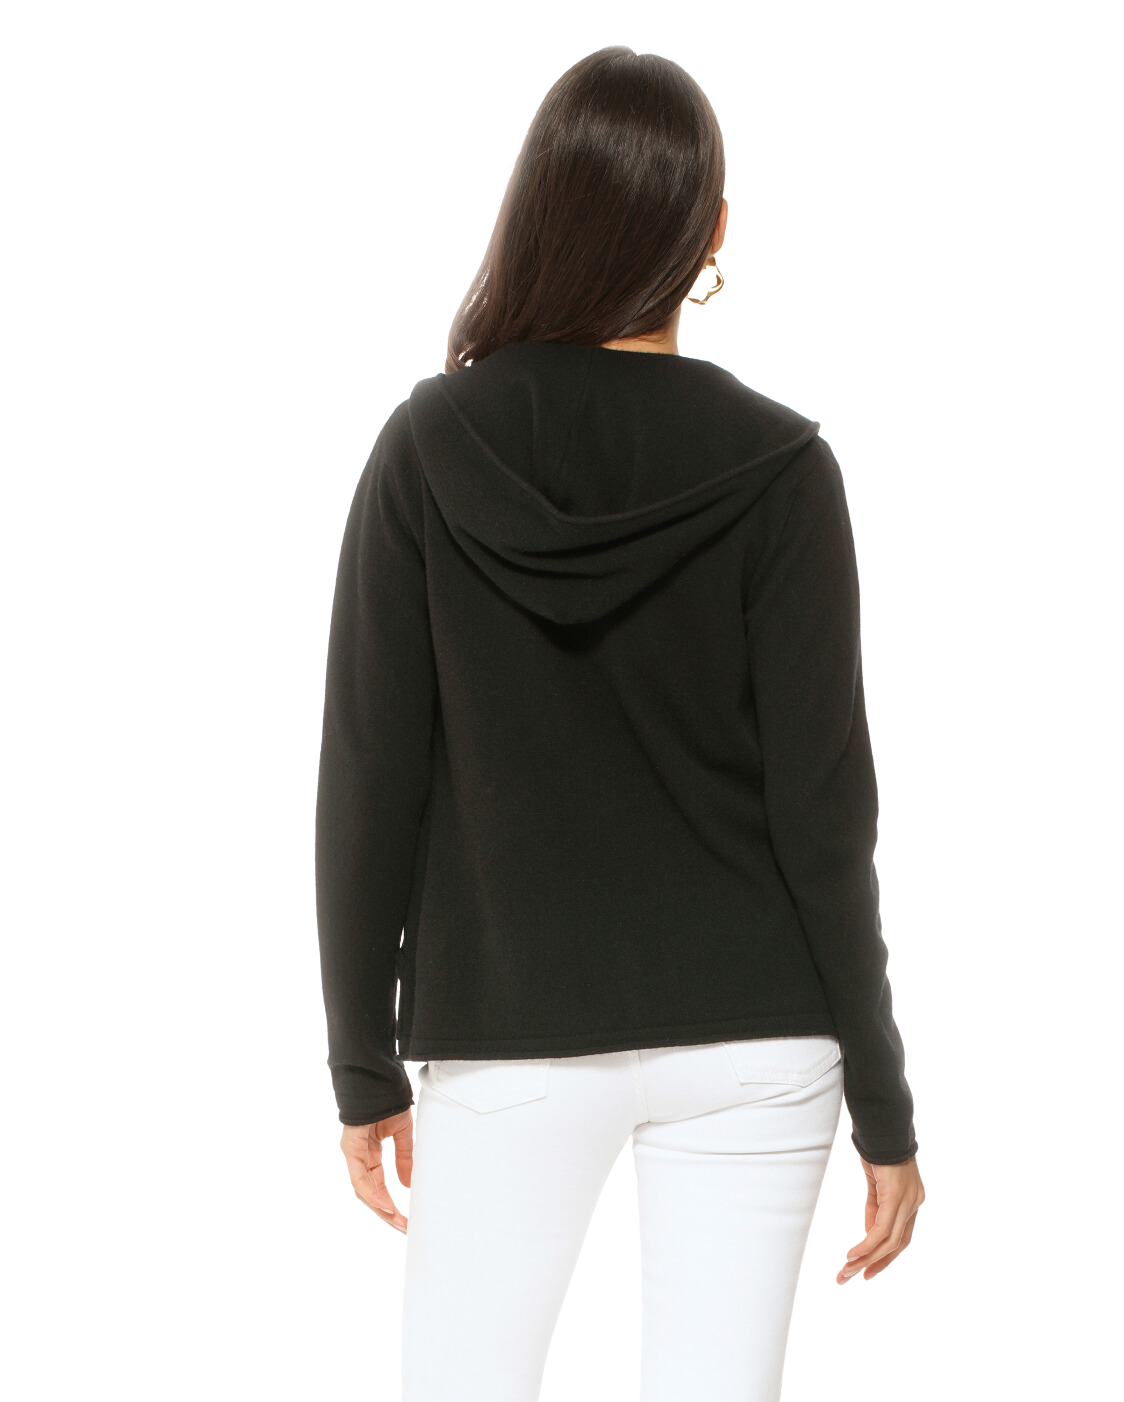 Monticelli Women's Pure Cashmere Hoodie Sweater Black  2